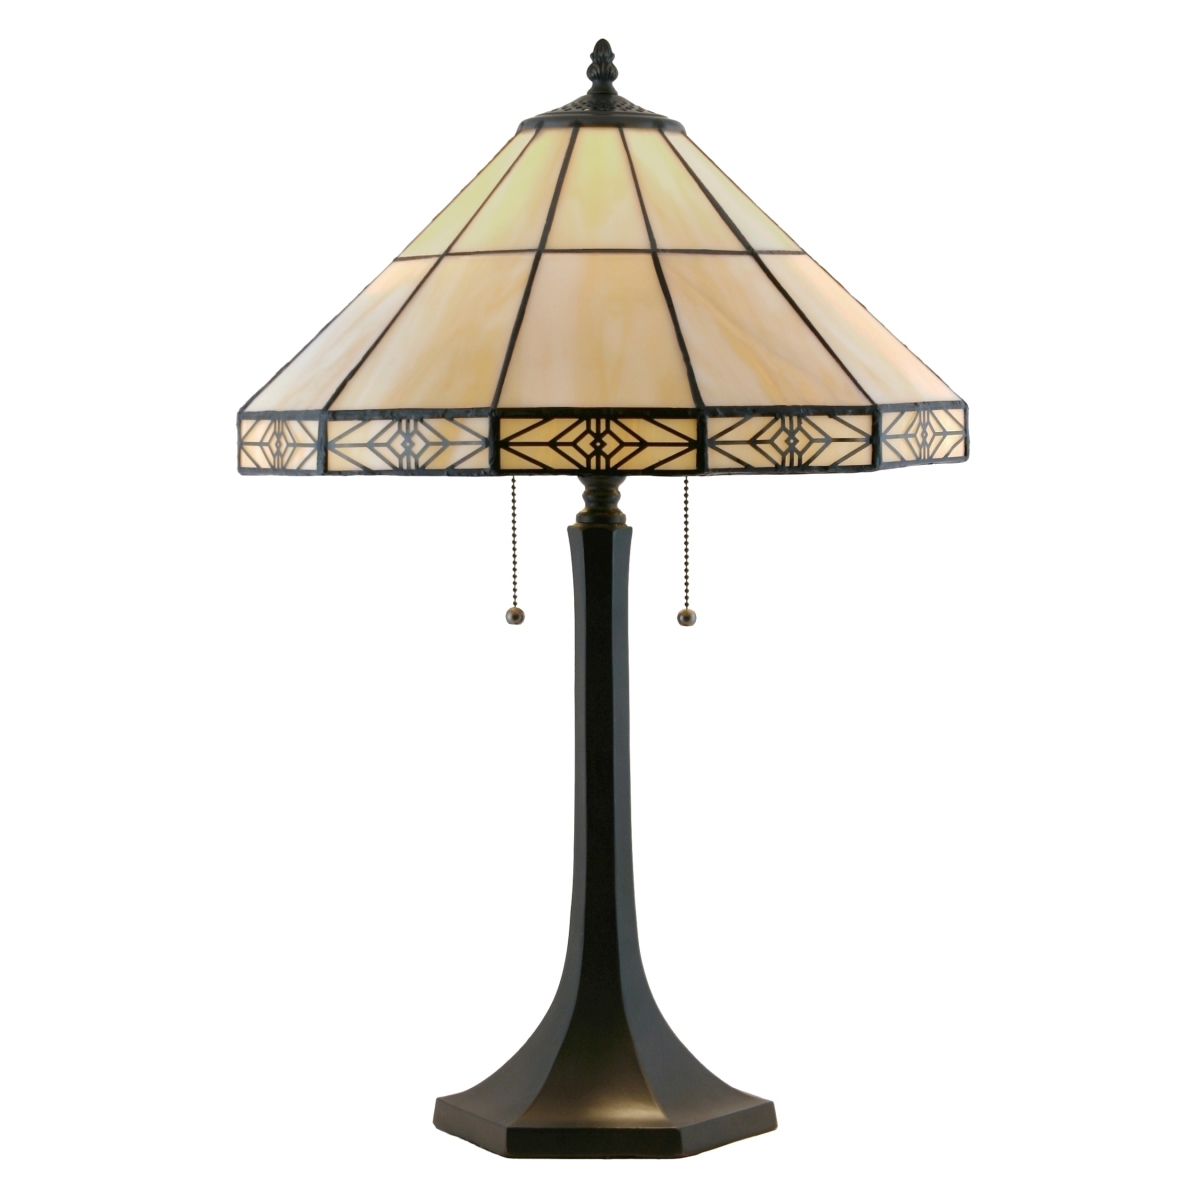 1412tl-17t 17 X 25.5 In. Simply Misson Ii Stained Glass Table Lamp - Rich Espresso